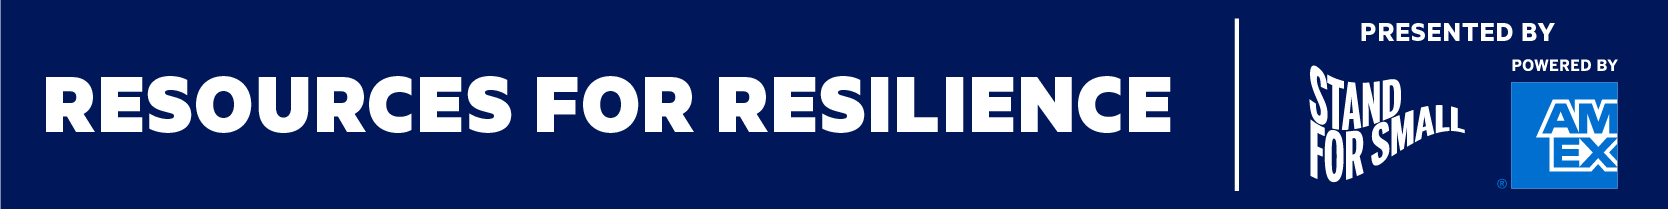 resources for resilience banner (2) (2)